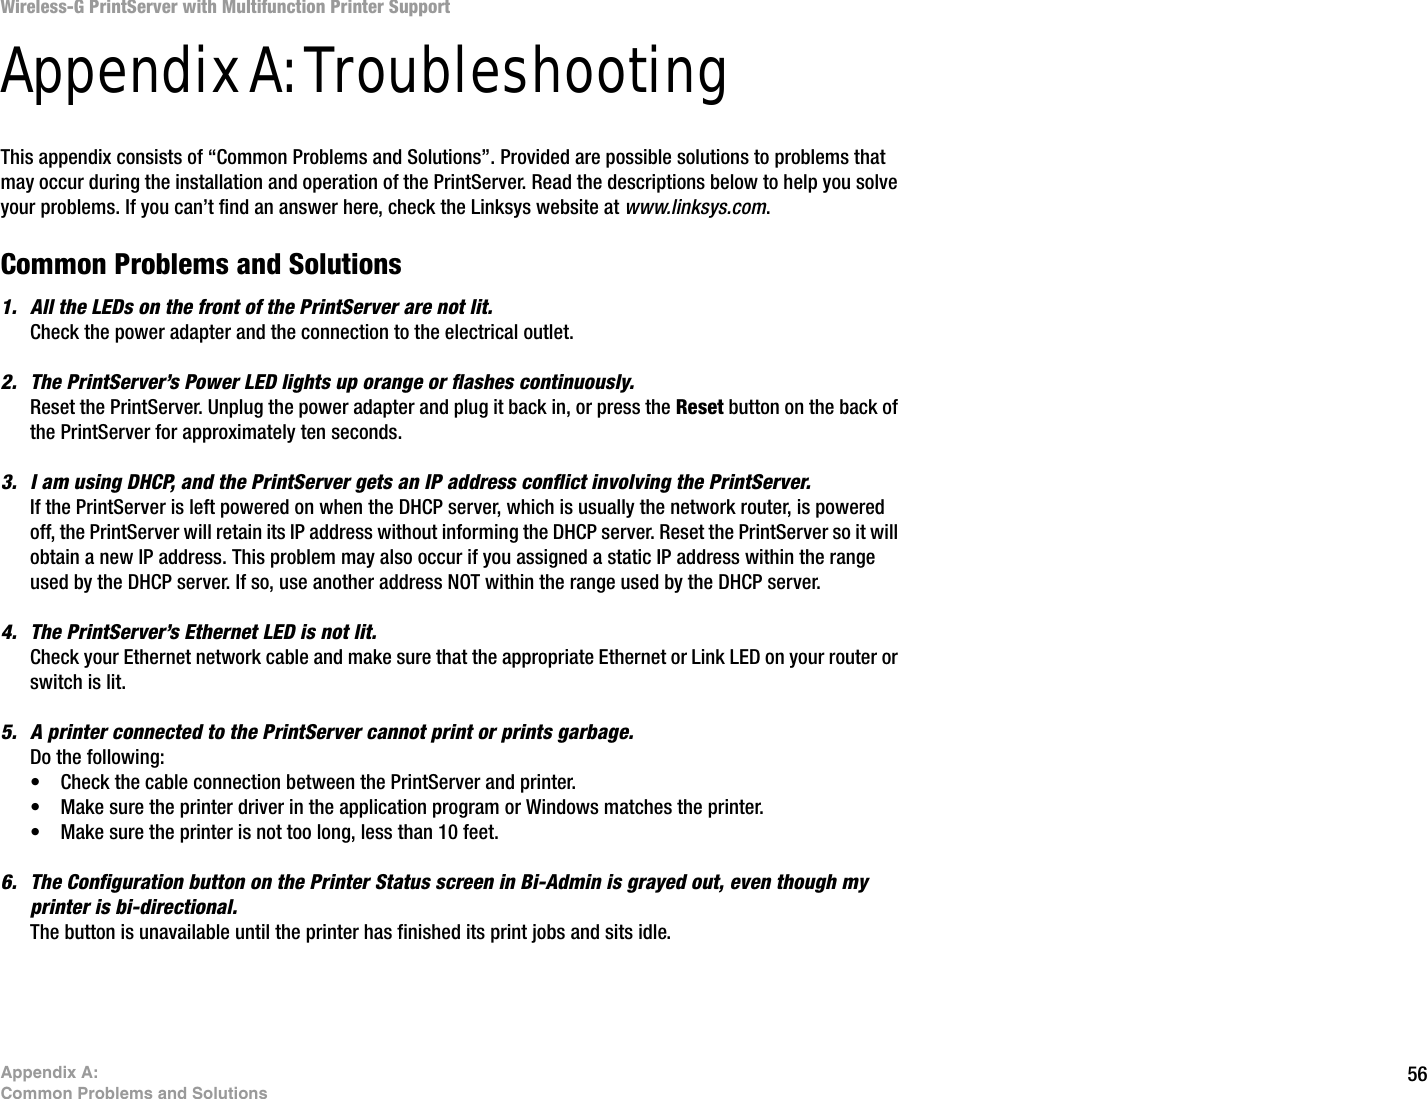 56Appendix A: Common Problems and SolutionsWireless-G PrintServer with Multifunction Printer SupportAppendix A: TroubleshootingThis appendix consists of “Common Problems and Solutions”. Provided are possible solutions to problems that may occur during the installation and operation of the PrintServer. Read the descriptions below to help you solve your problems. If you can’t find an answer here, check the Linksys website at www.linksys.com.Common Problems and Solutions1. All the LEDs on the front of the PrintServer are not lit.Check the power adapter and the connection to the electrical outlet.2. The PrintServer’s Power LED lights up orange or flashes continuously.Reset the PrintServer. Unplug the power adapter and plug it back in, or press the Reset button on the back of the PrintServer for approximately ten seconds.3. I am using DHCP, and the PrintServer gets an IP address conflict involving the PrintServer.If the PrintServer is left powered on when the DHCP server, which is usually the network router, is powered off, the PrintServer will retain its IP address without informing the DHCP server. Reset the PrintServer so it will obtain a new IP address. This problem may also occur if you assigned a static IP address within the range used by the DHCP server. If so, use another address NOT within the range used by the DHCP server.4. The PrintServer’s Ethernet LED is not lit.Check your Ethernet network cable and make sure that the appropriate Ethernet or Link LED on your router or switch is lit. 5. A printer connected to the PrintServer cannot print or prints garbage.Do the following:• Check the cable connection between the PrintServer and printer.• Make sure the printer driver in the application program or Windows matches the printer.• Make sure the printer is not too long, less than 10 feet.6. The Configuration button on the Printer Status screen in Bi-Admin is grayed out, even though my printer is bi-directional. The button is unavailable until the printer has finished its print jobs and sits idle.